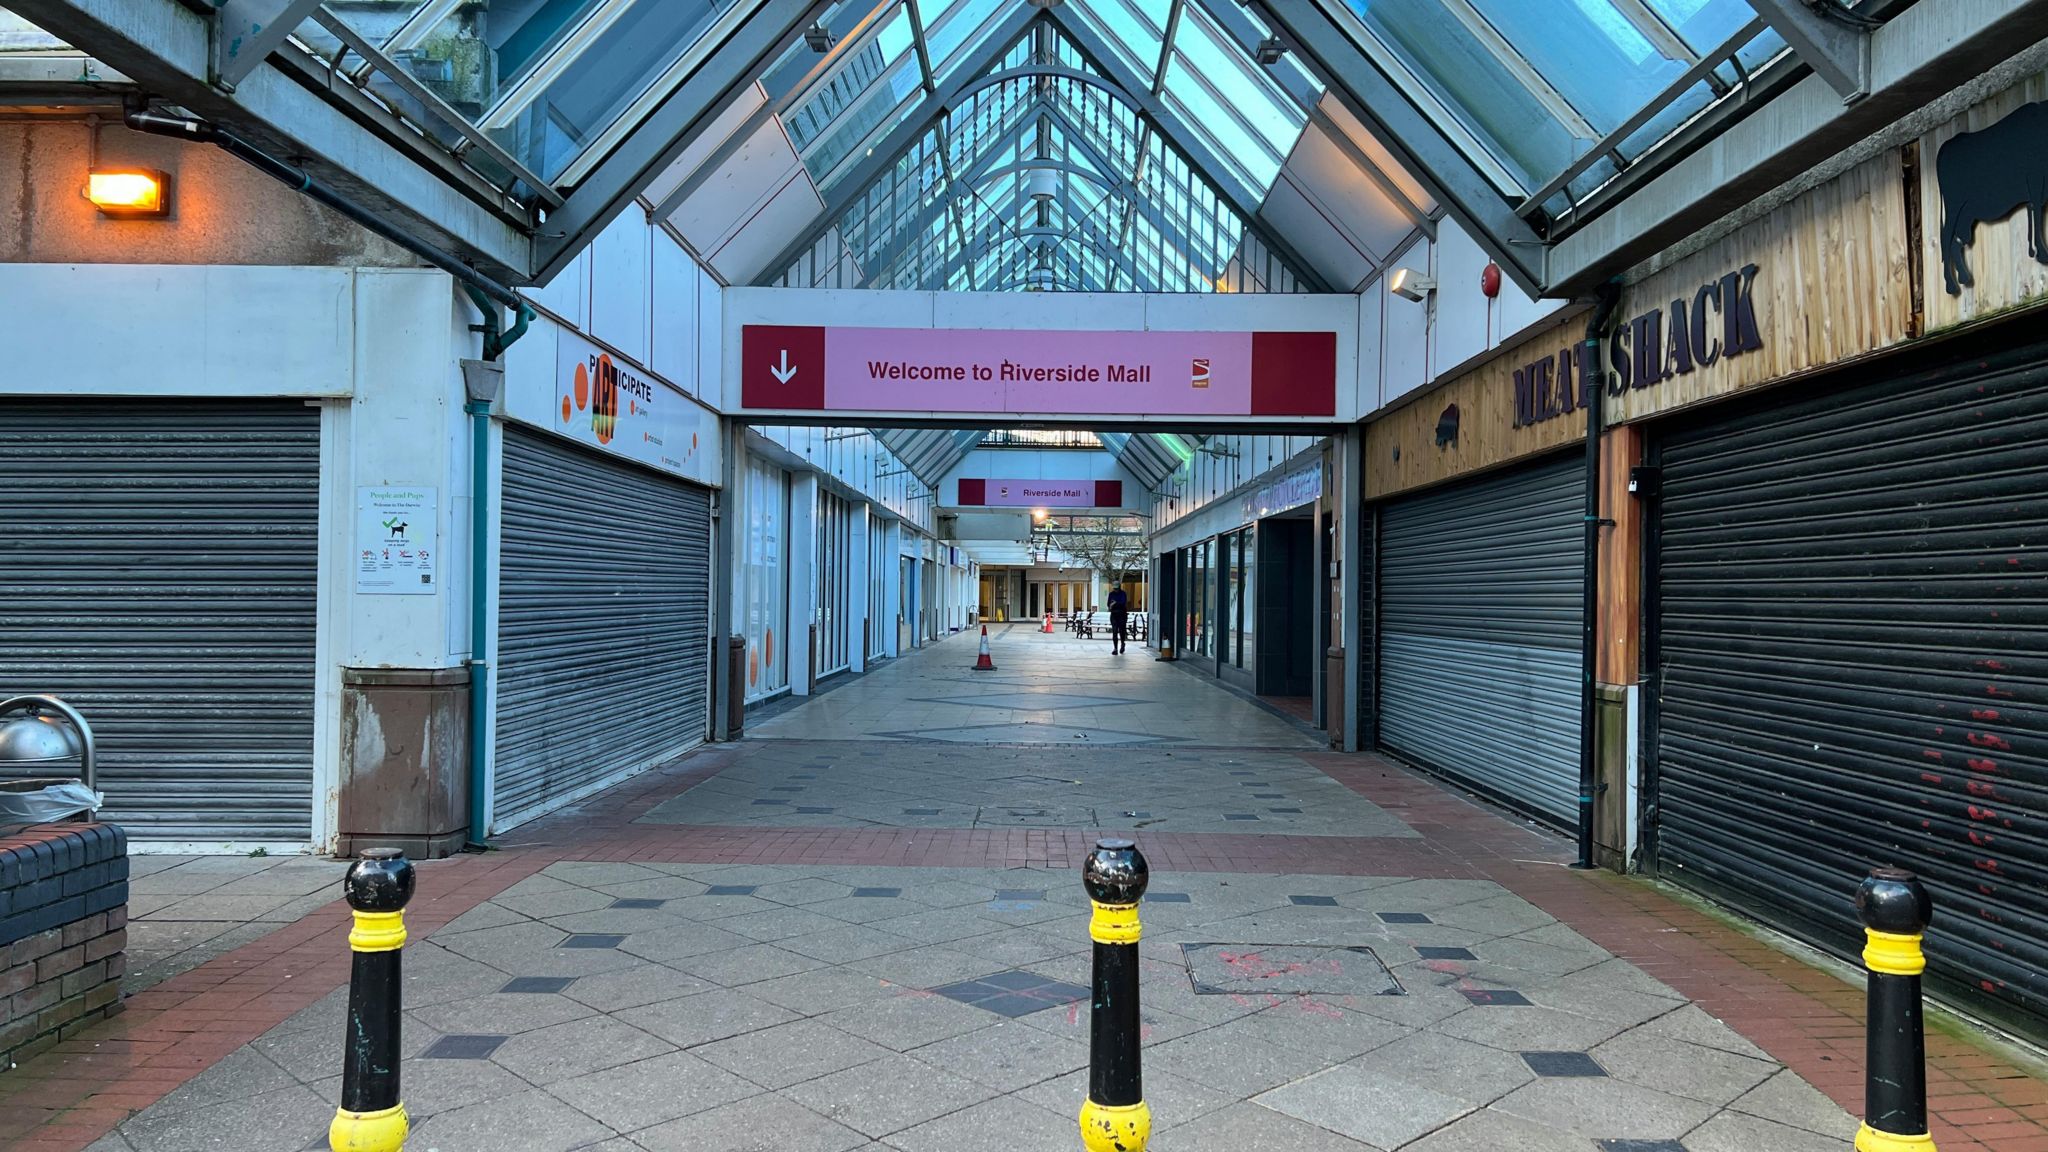 The entrance of the old Riverside shopping centre with boarded up shops